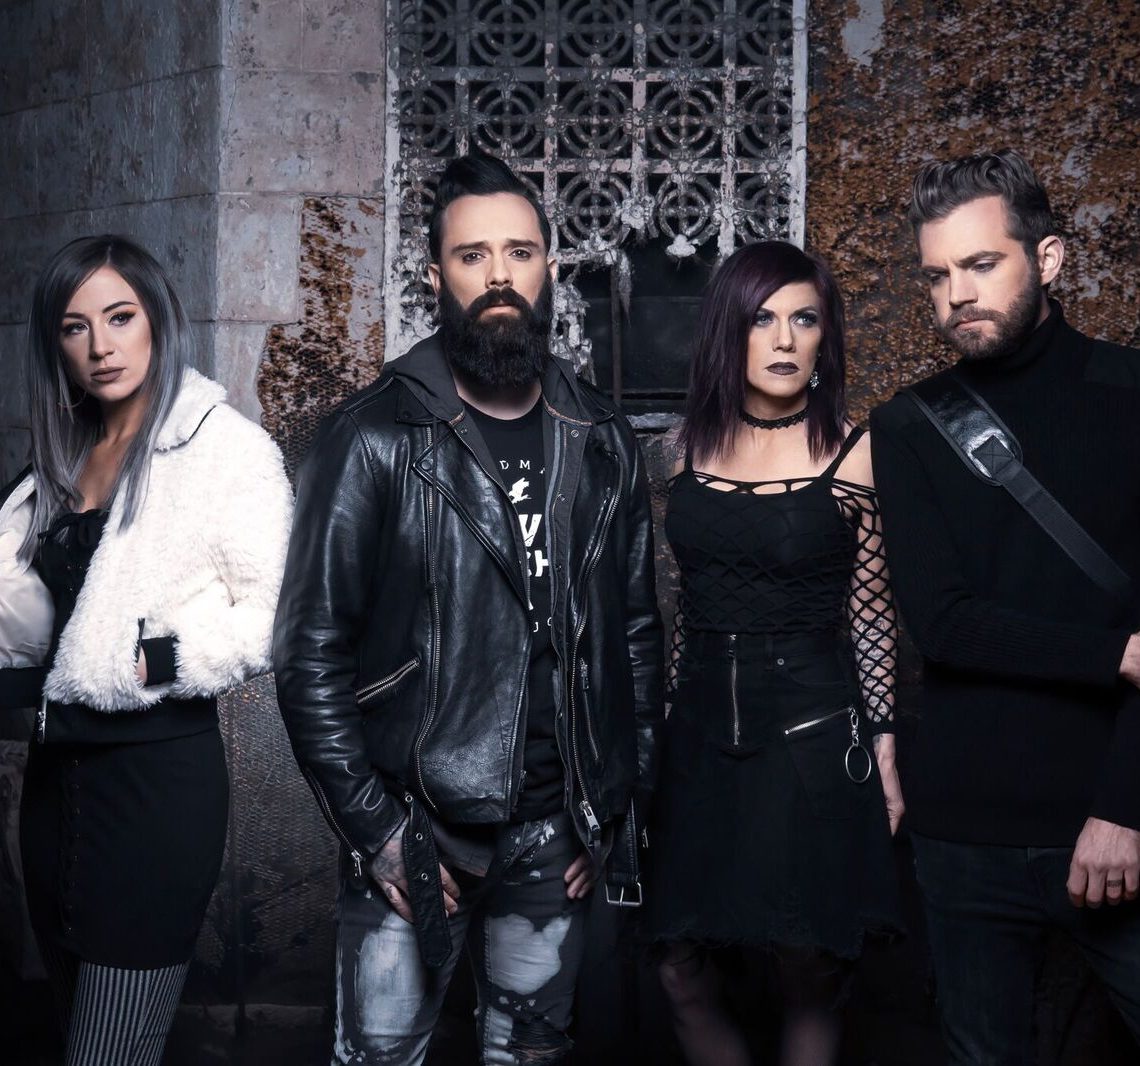 Skillet announce headlining “Skillet: Victorious Tour” throughout Europe this Nov and Dec including London on 10th